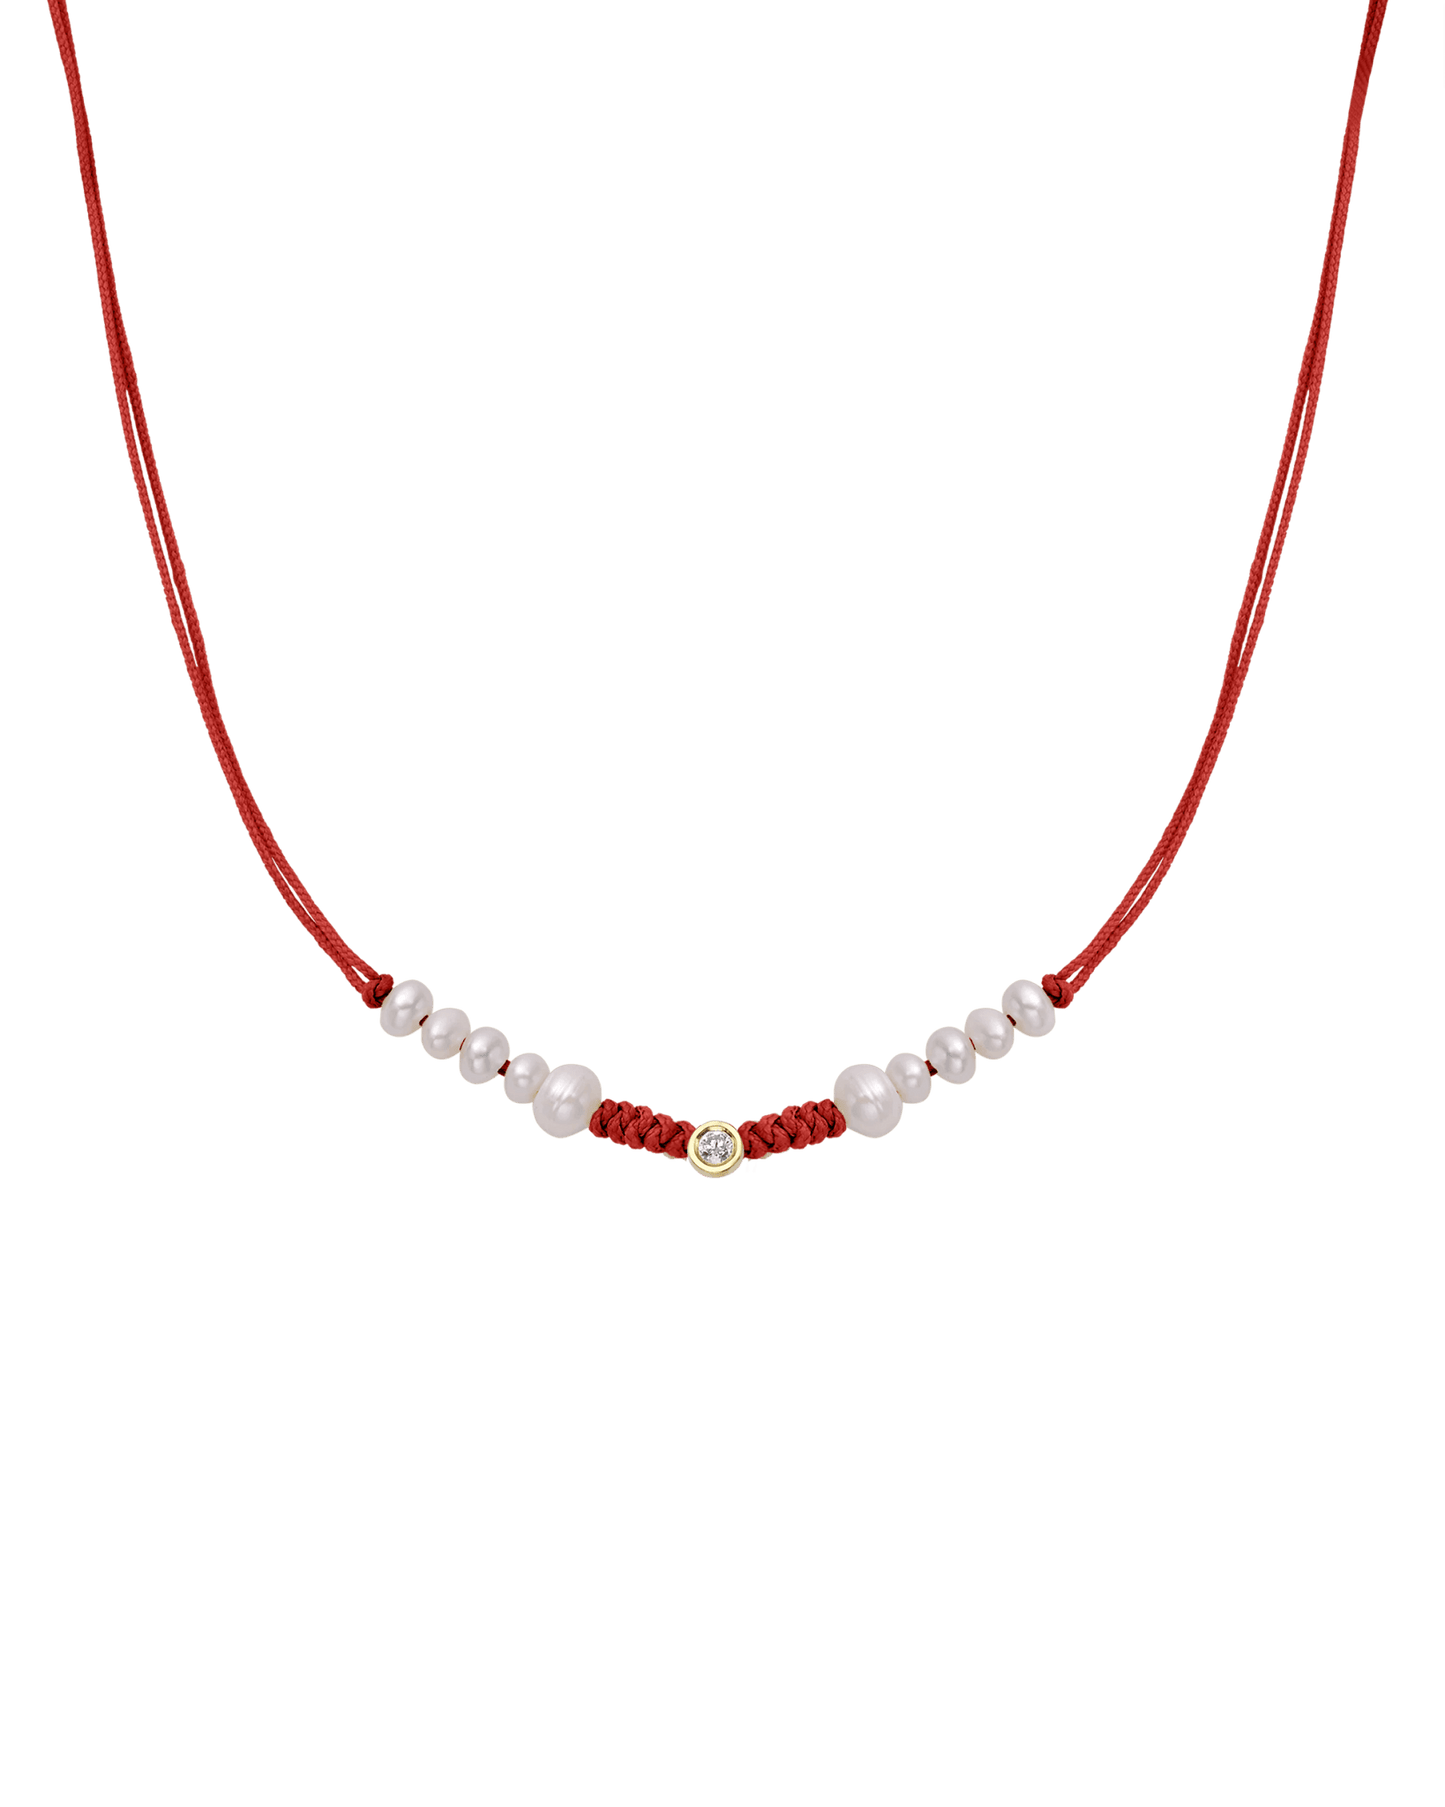 Ten Natural Pearl String of Love Necklace - 14K Yellow Gold Necklaces 14K Solid Gold Red Medium: 0.04ct 